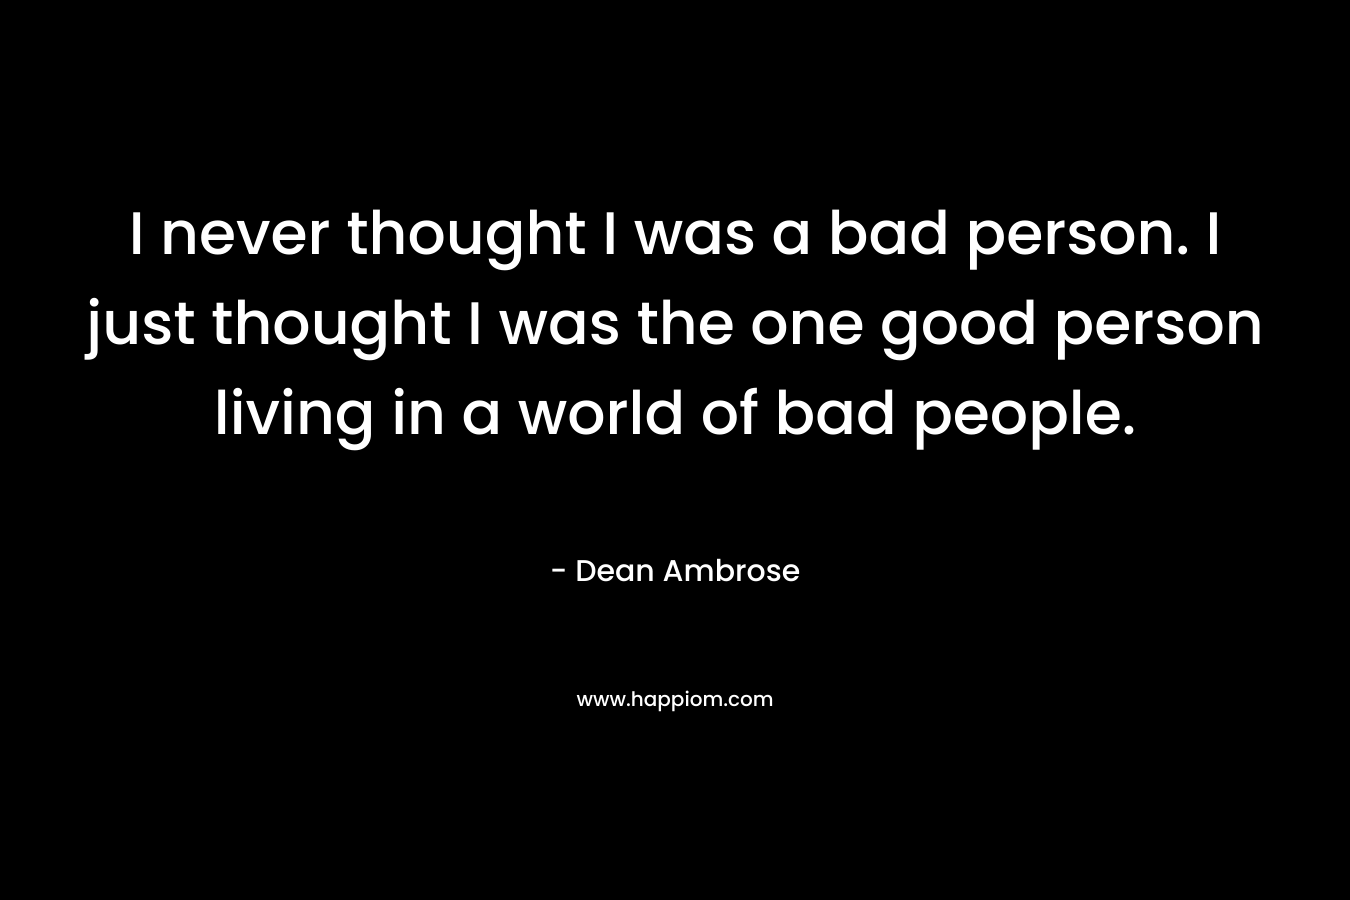 I never thought I was a bad person. I just thought I was the one good person living in a world of bad people.